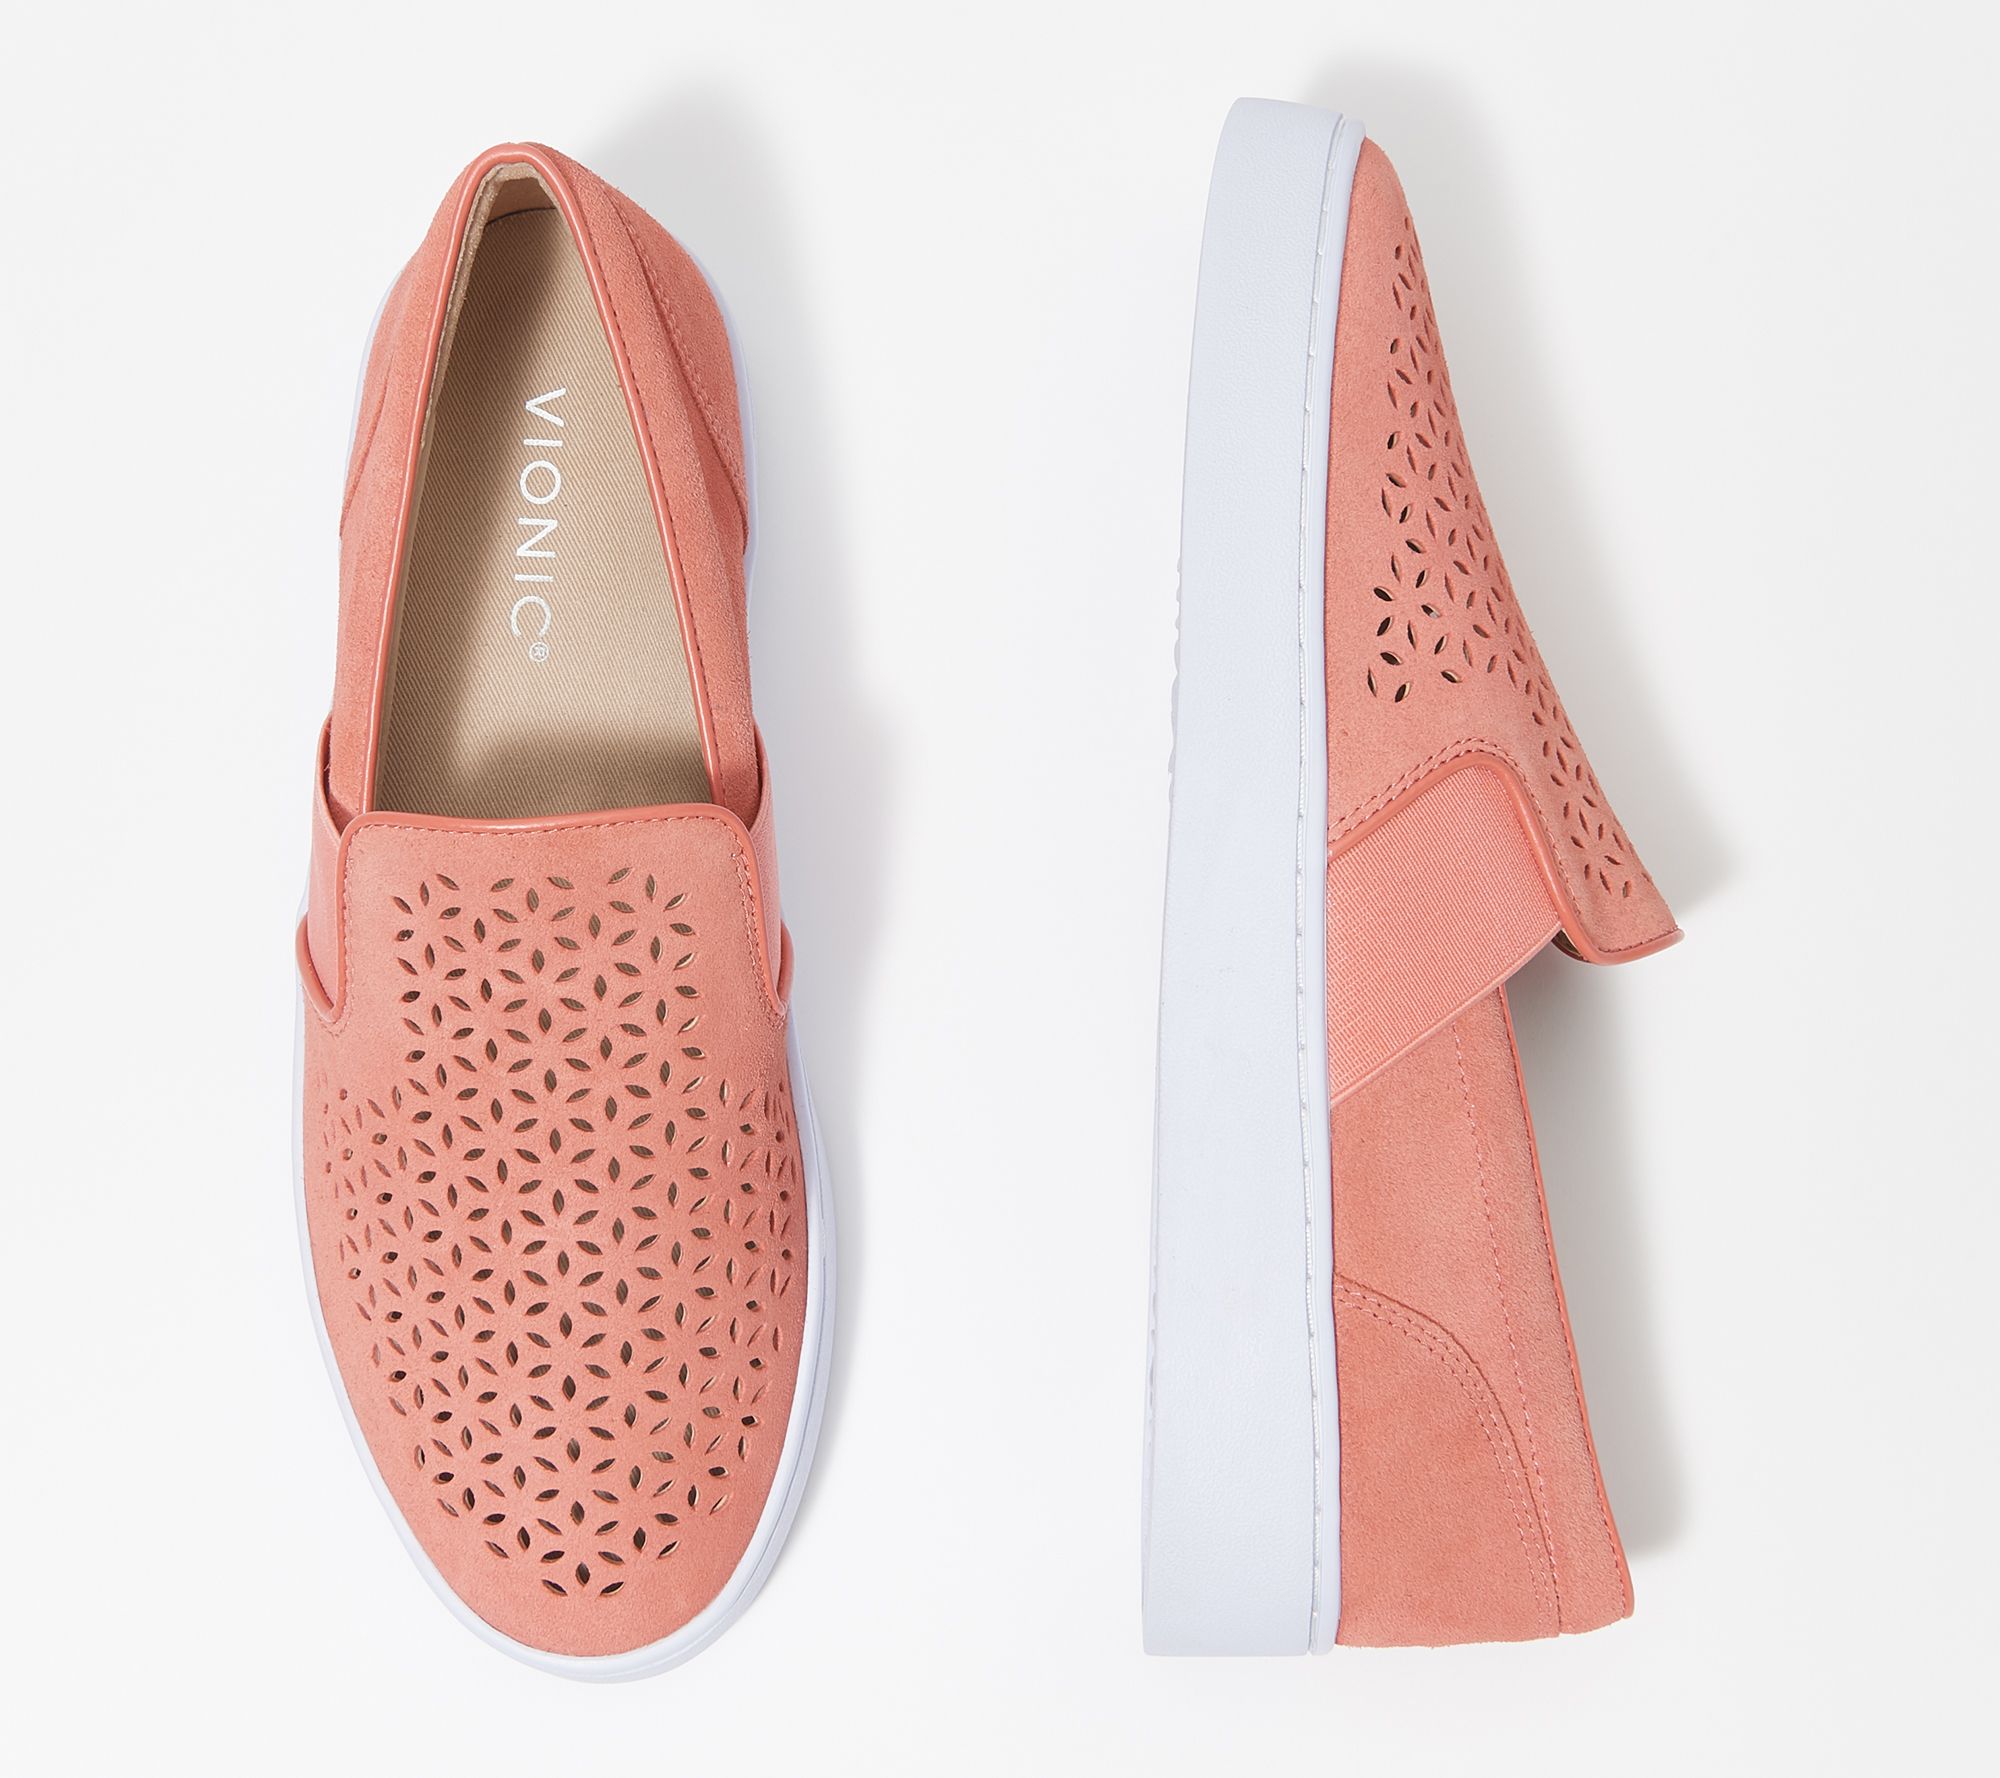 Vionic Suede Perforated Slip-On 